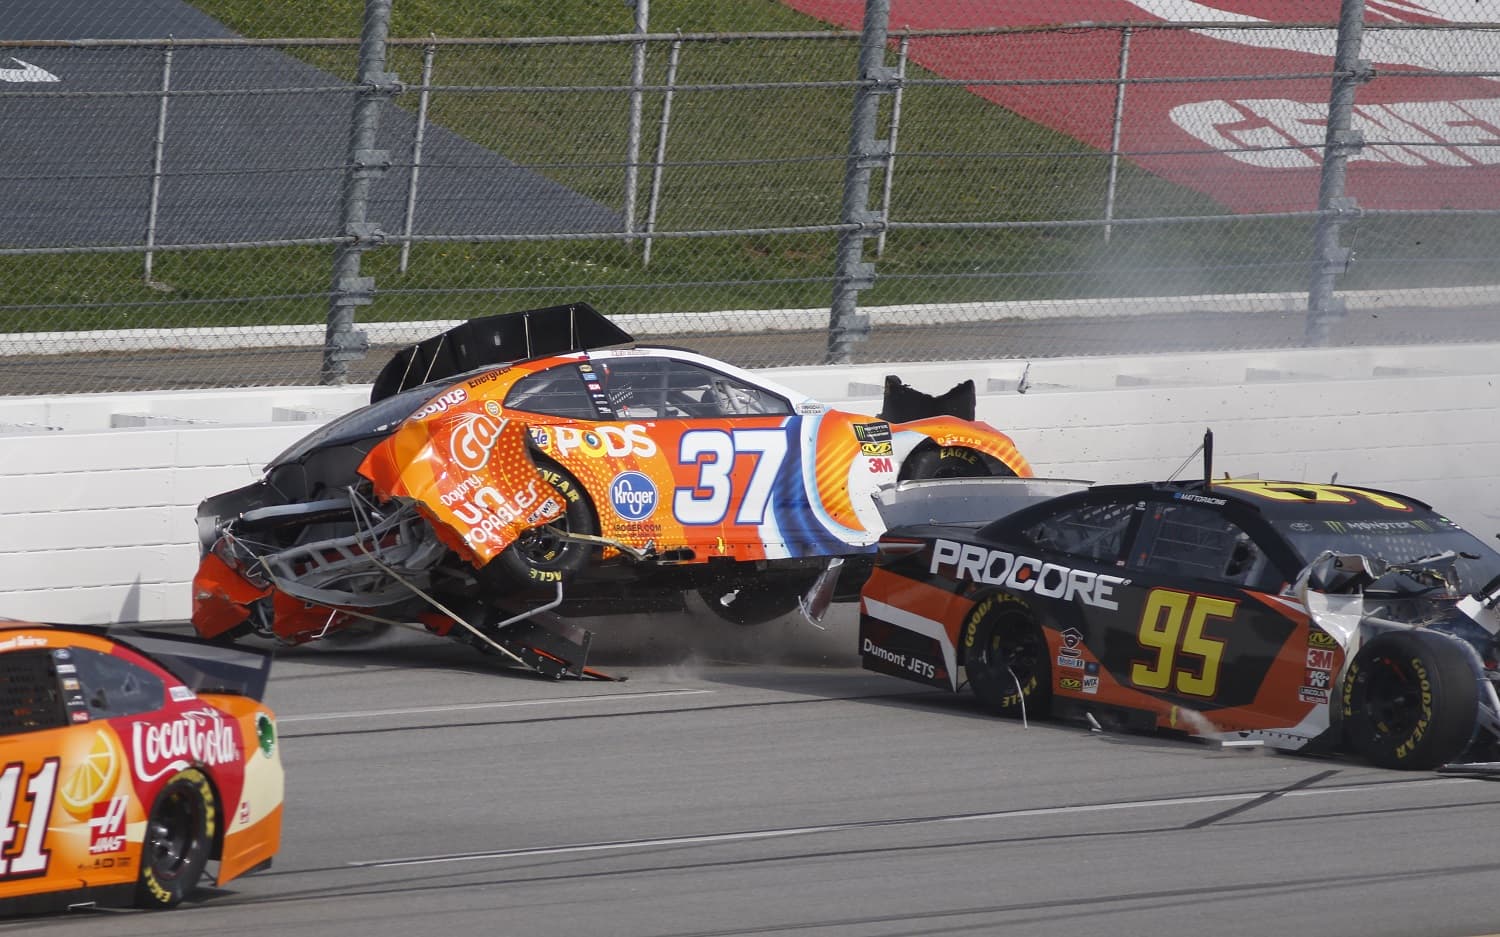 Chris Buescher (37) and Matt DiBenedetto (95) wreck during the GEICO 500 on April 28, 2019, at Talladega Superspeedway. | Jeff Robinson/Icon Sportswire via Getty Images